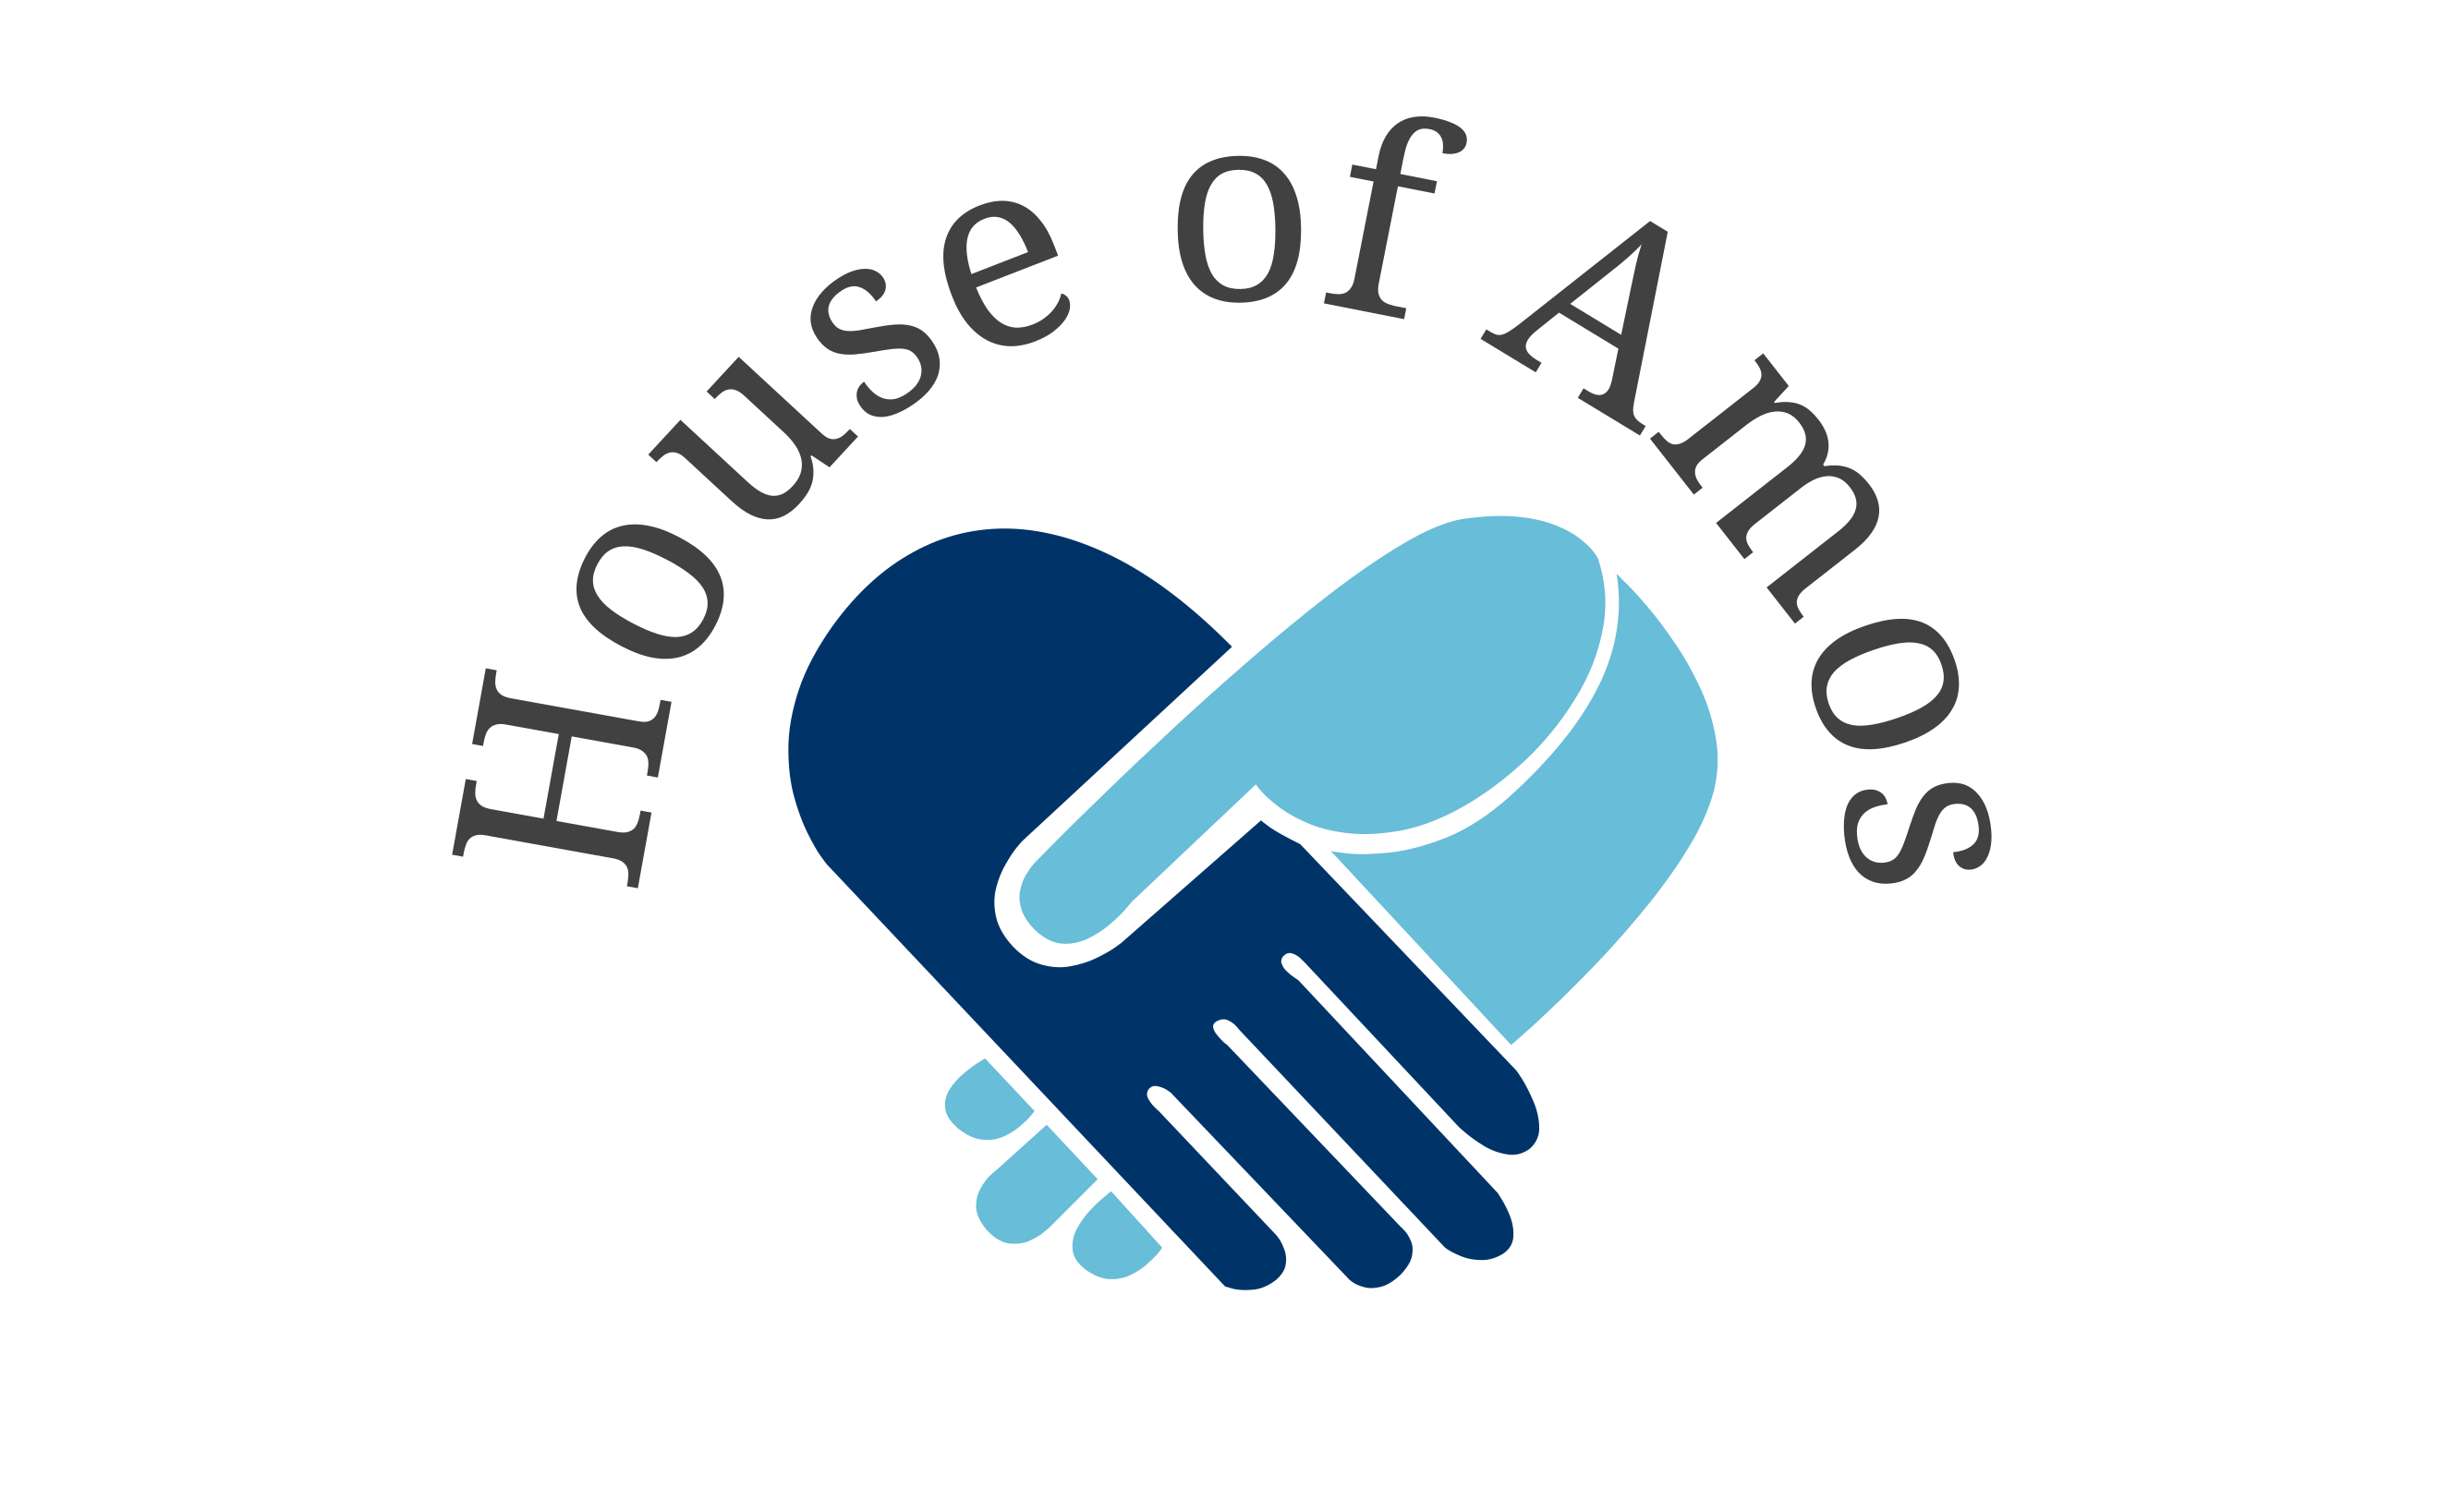 House of Amos